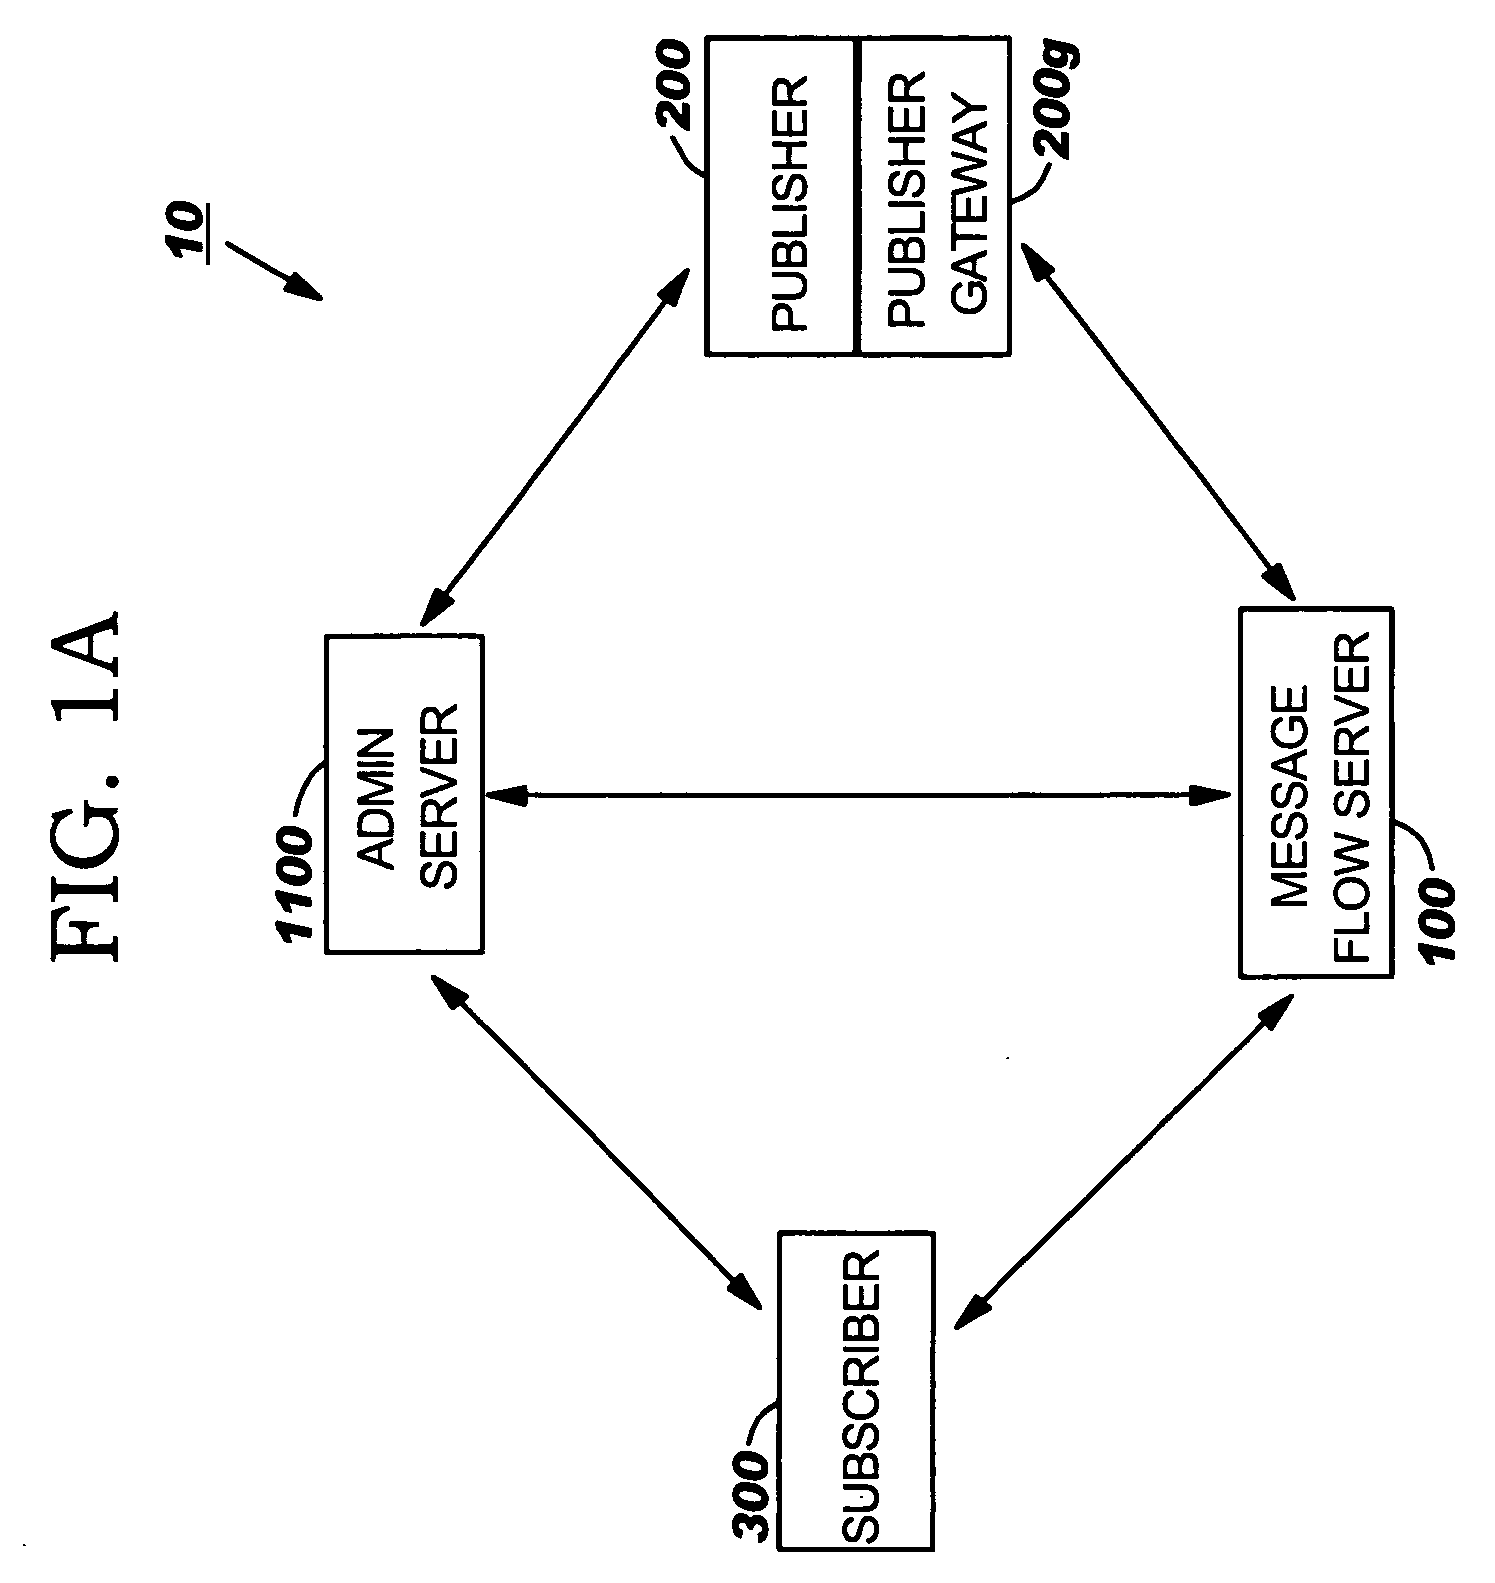 Systems with user selectable data attributes for automated electronic search, identification and publication of relevant data from electronic data records at multiple data sources